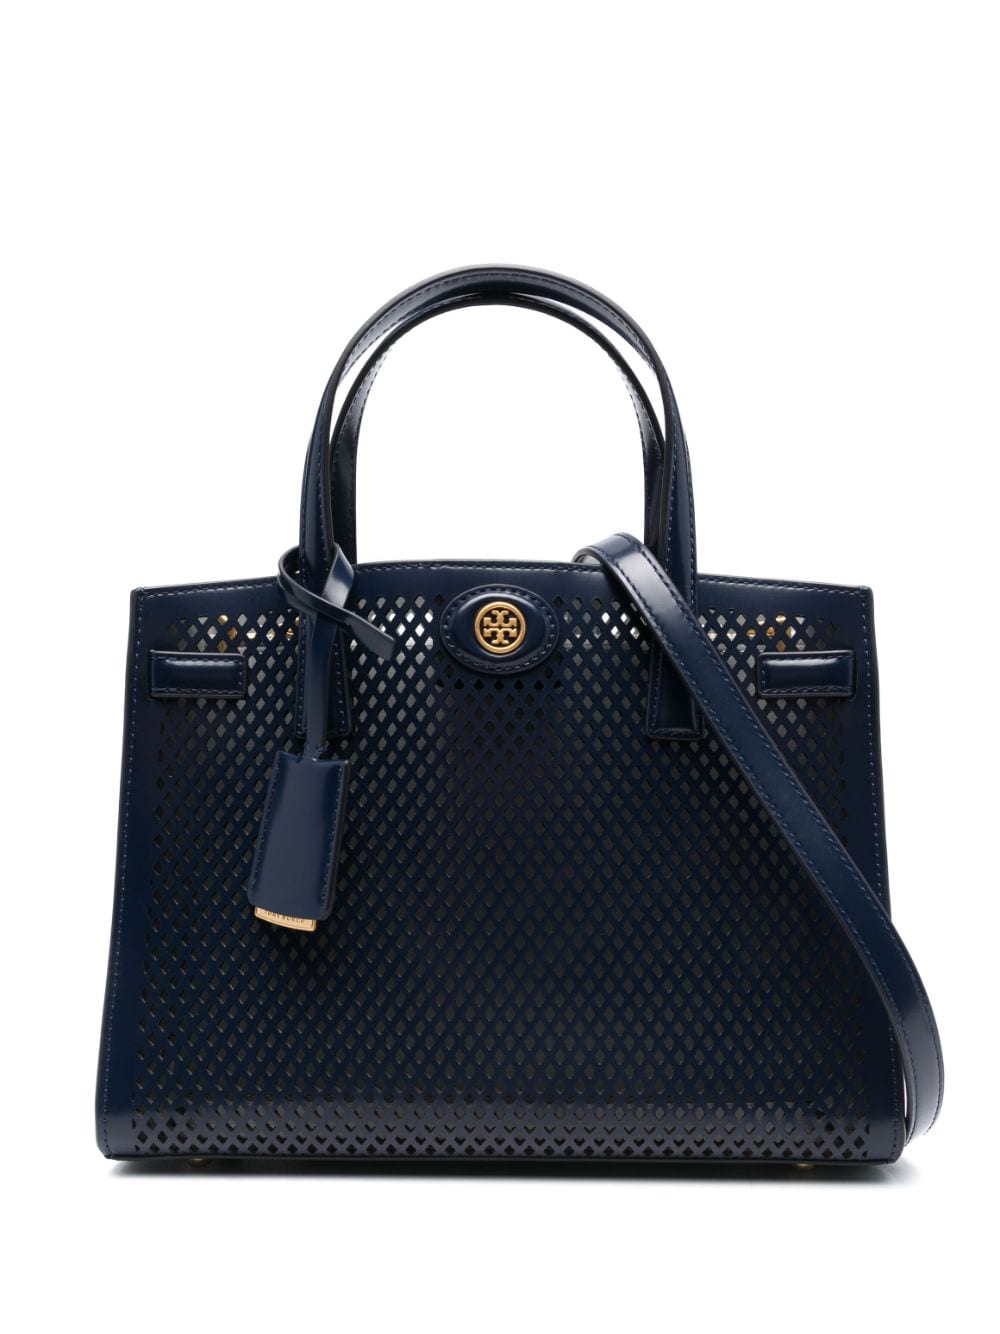 Tory Burch small Robinson perforated shoulder bag, Blue